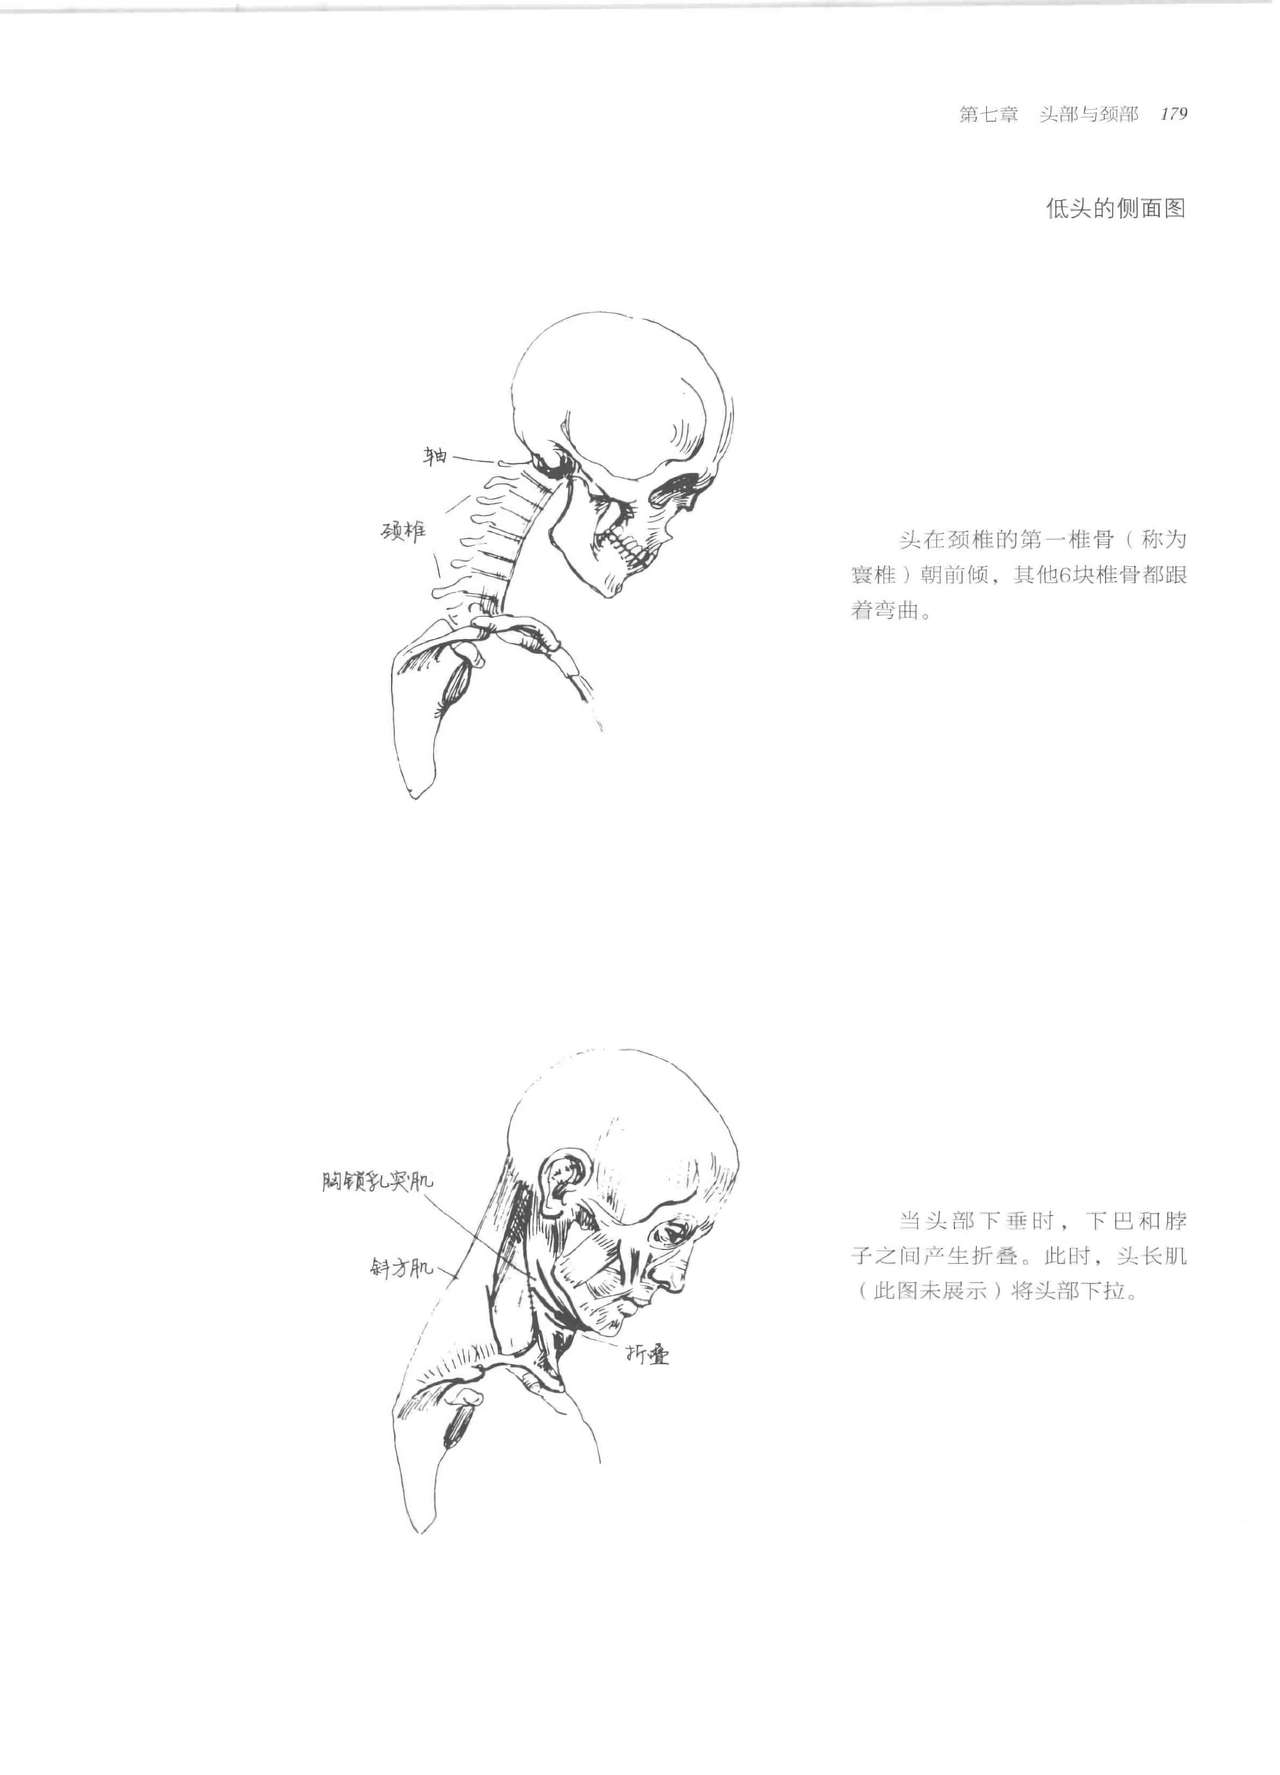 Anatomy-A Complete Guide for Artists - Joseph Sheppard [Chinese] 179